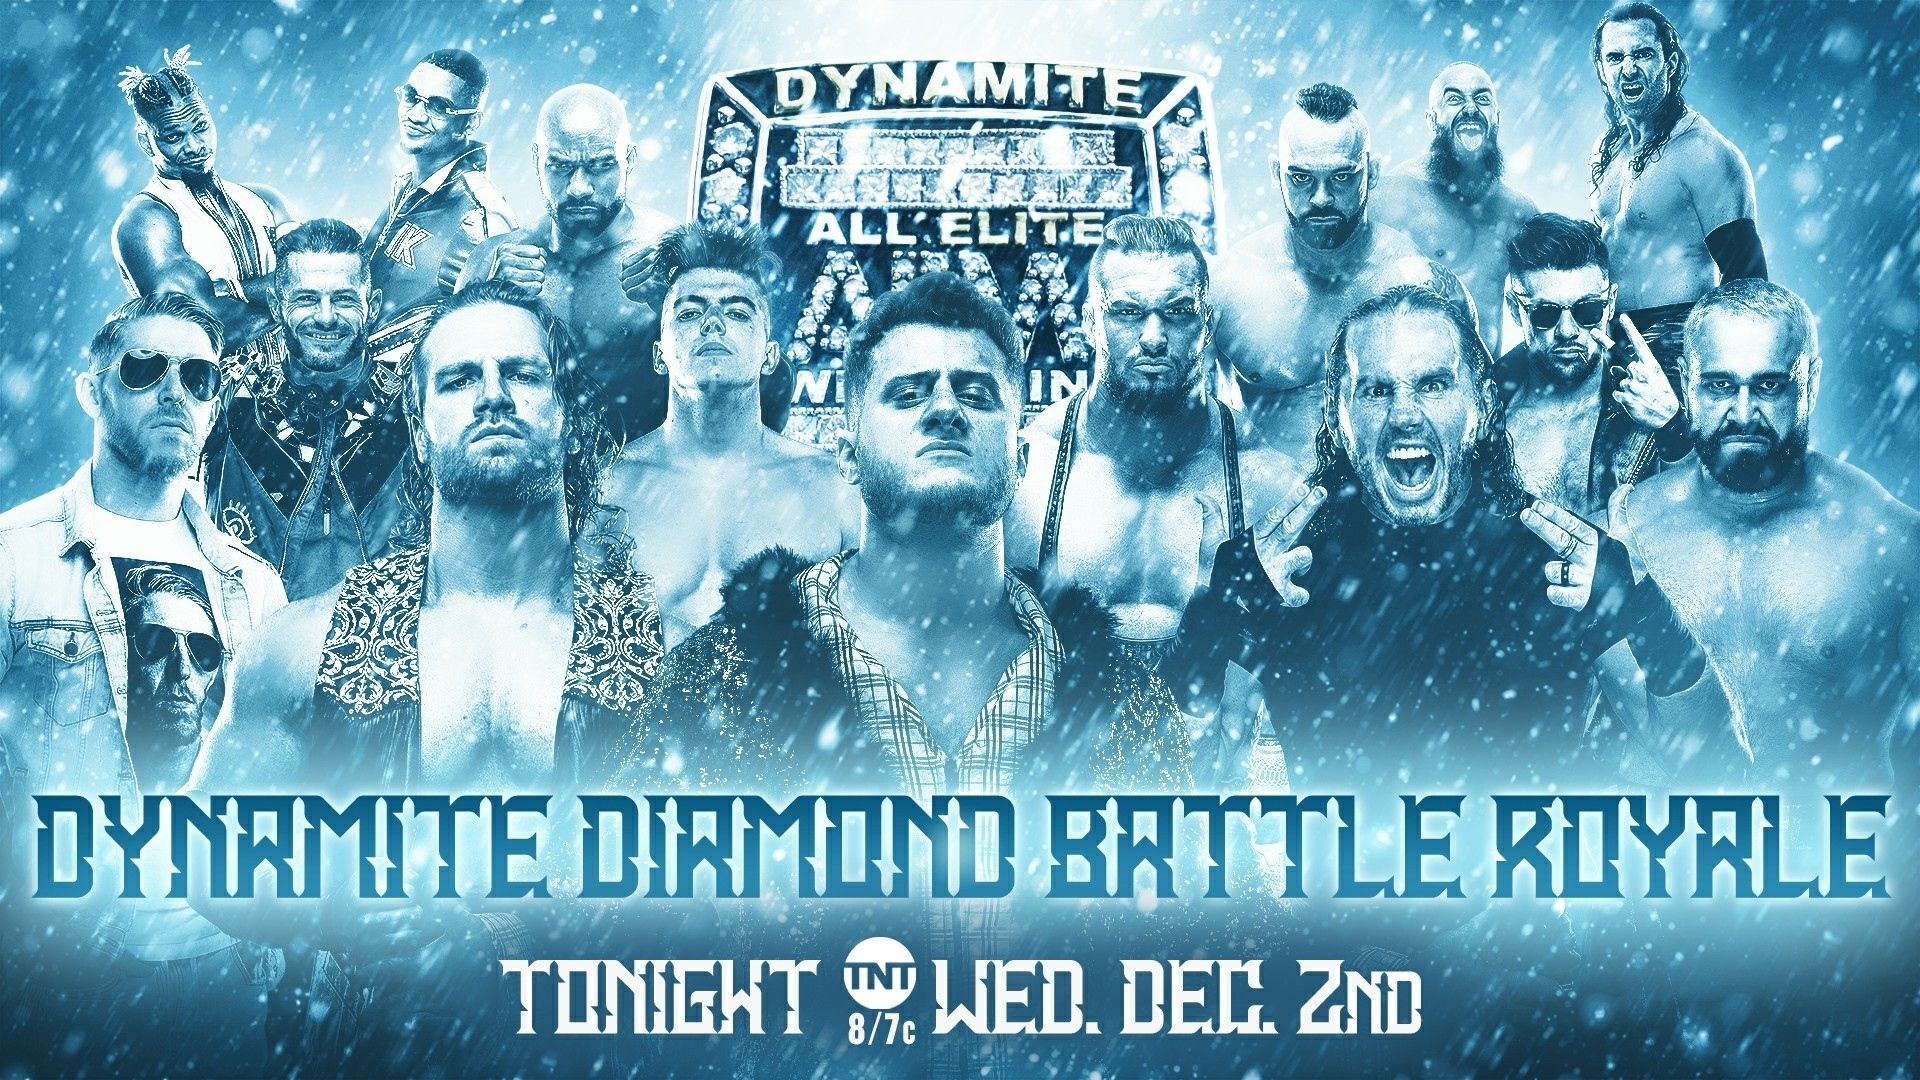 AEW Winter Is Coming Was The Most Important Special Dynamite Ever